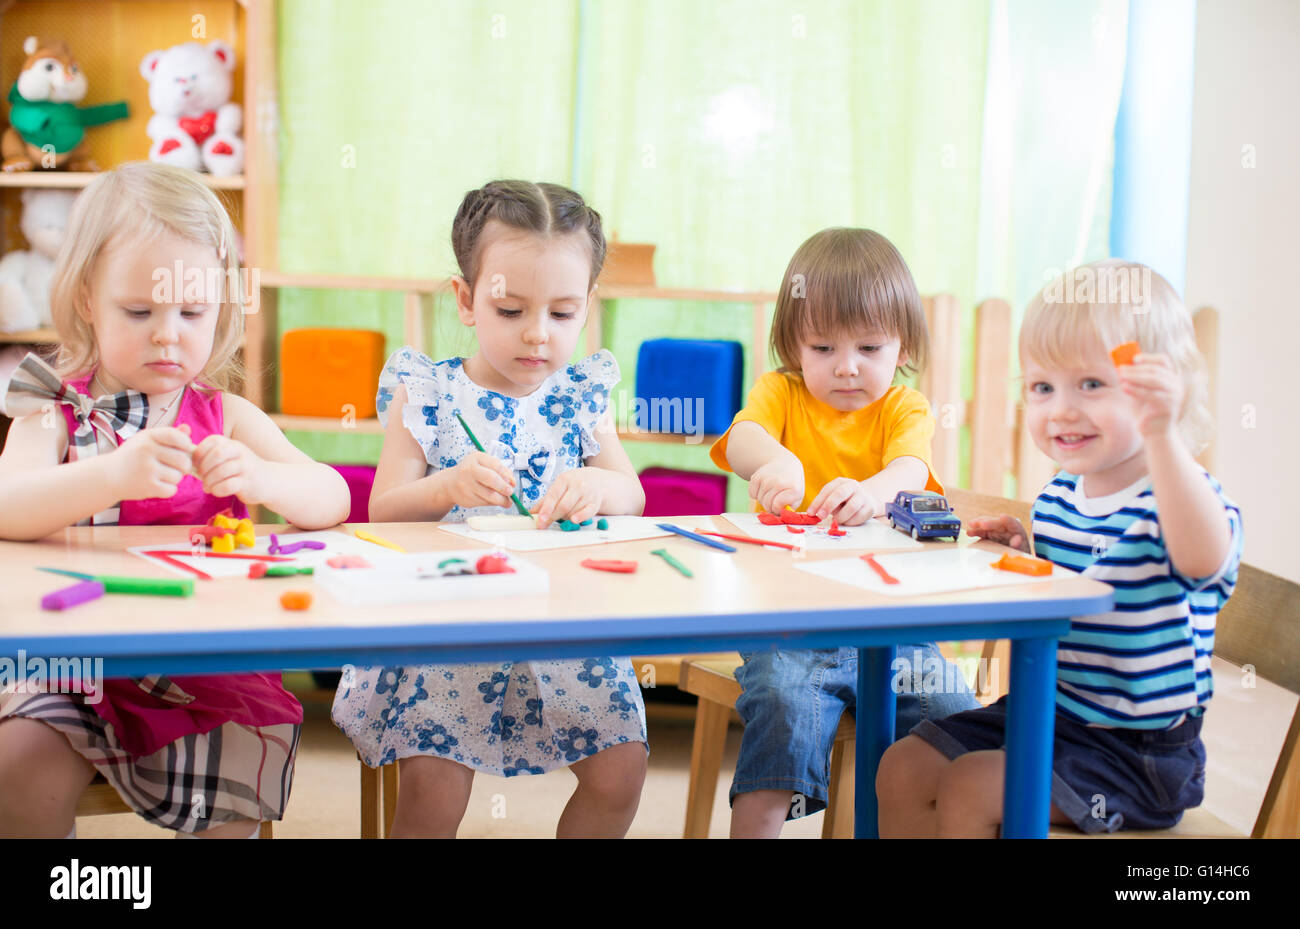 kids group learning arts and crafts in playroom with interest Stock Photo